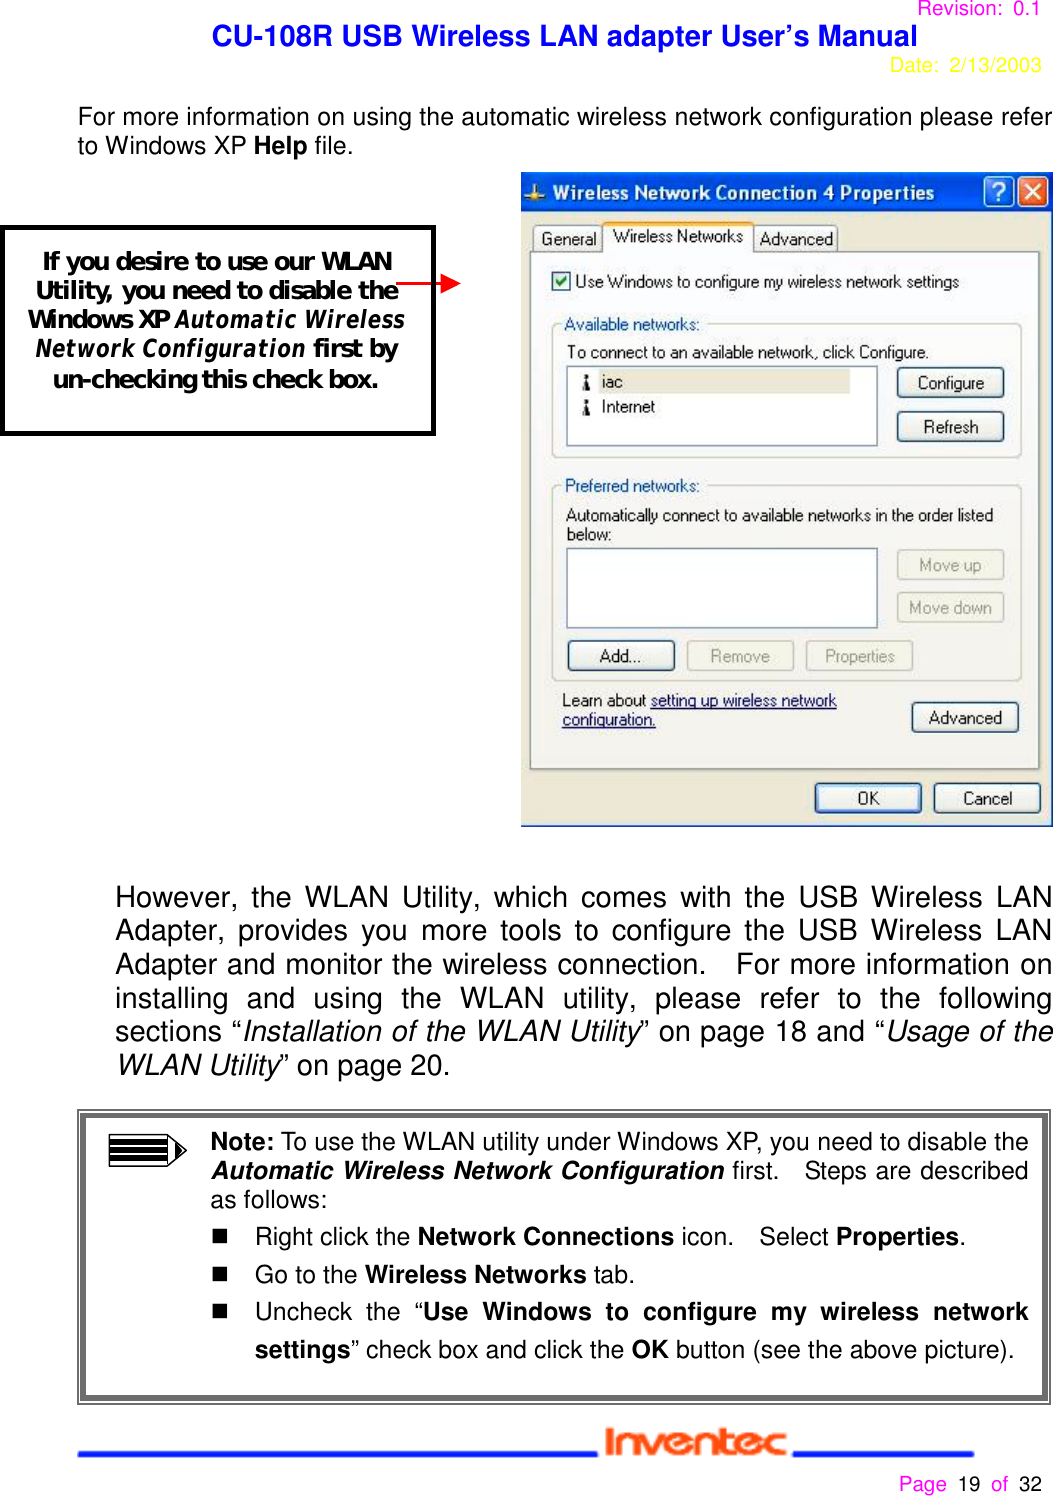 Revision: 0.1 CU-108R USB Wireless LAN adapter User’s ManualDate: 2/13/2003 Page 19 of 32 For more information on using the automatic wireless network configuration please referto Windows XP Help file.However, the WLAN Utility, which comes with the USB Wireless LANAdapter, provides you more tools to configure the USB Wireless LANAdapter and monitor the wireless connection.  For more information oninstalling and using the WLAN utility, please refer to the followingsections “Installation of the WLAN Utility” on page 18 and “Usage of theWLAN Utility” on page 20.Note: To use the WLAN utility under Windows XP, you need to disable theAutomatic Wireless Network Configuration first.  Steps are describedas follows:&quot;  Right click the Network Connections icon.  Select Properties.&quot;  Go to the Wireless Networks tab.&quot;  Uncheck the “Use Windows to configure my wireless networksettings” check box and click the OK button (see the above picture).If you desire to use our WLANUtility, you need to disable theWindows XP Automatic WirelessNetwork Configuration first byun-checking this check box.